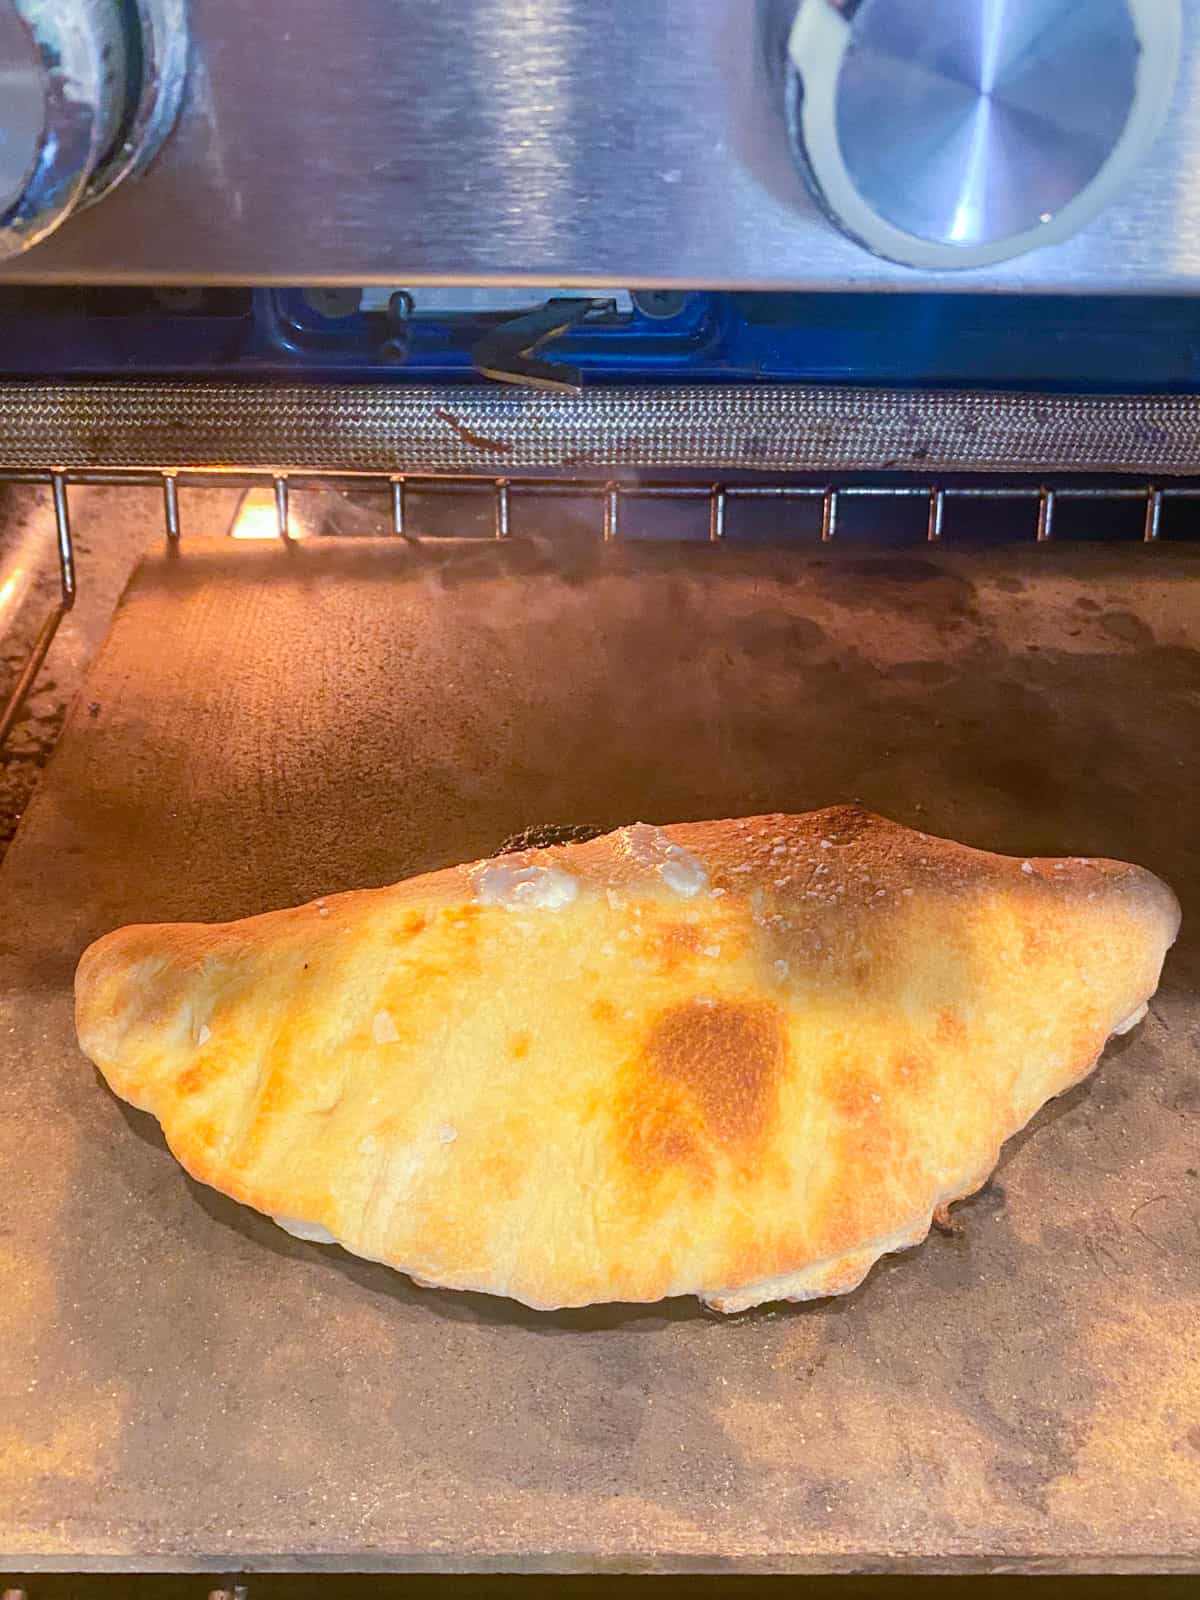 Bake the cheese calzone on a pizza stone in a hot oven until the outside is golden brown.